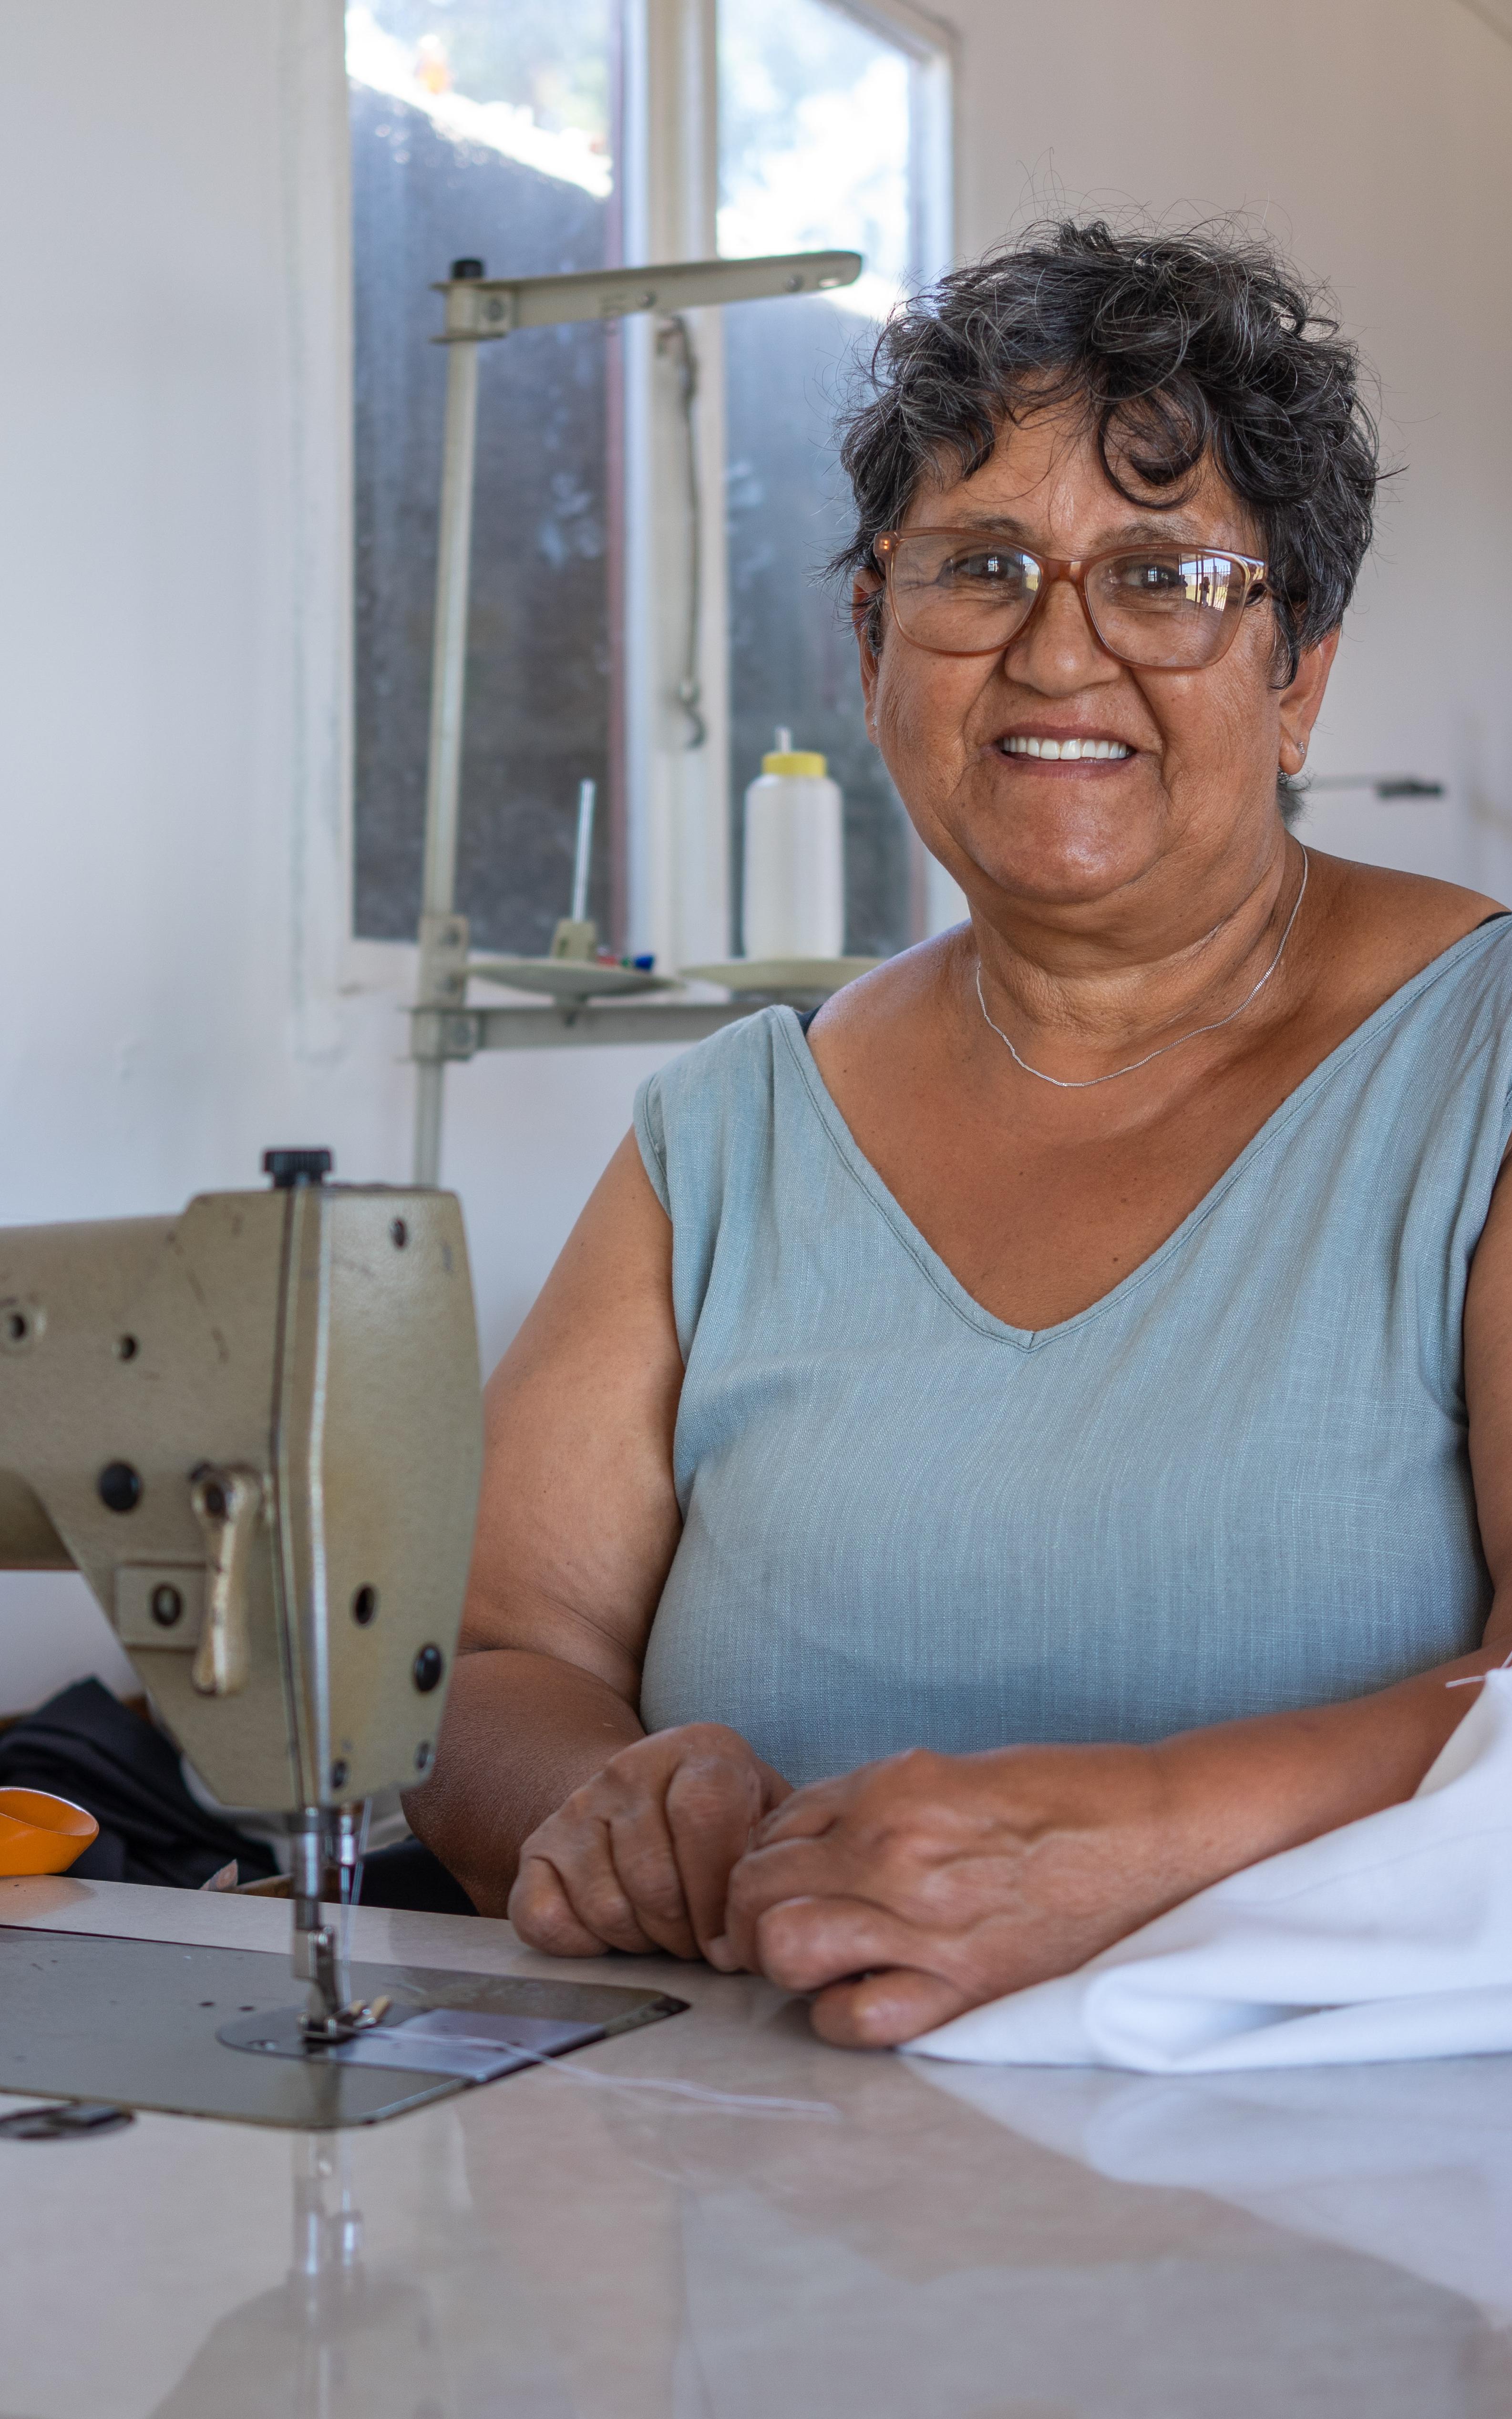 Beautiful News-Woman smiling with sewing machine. 